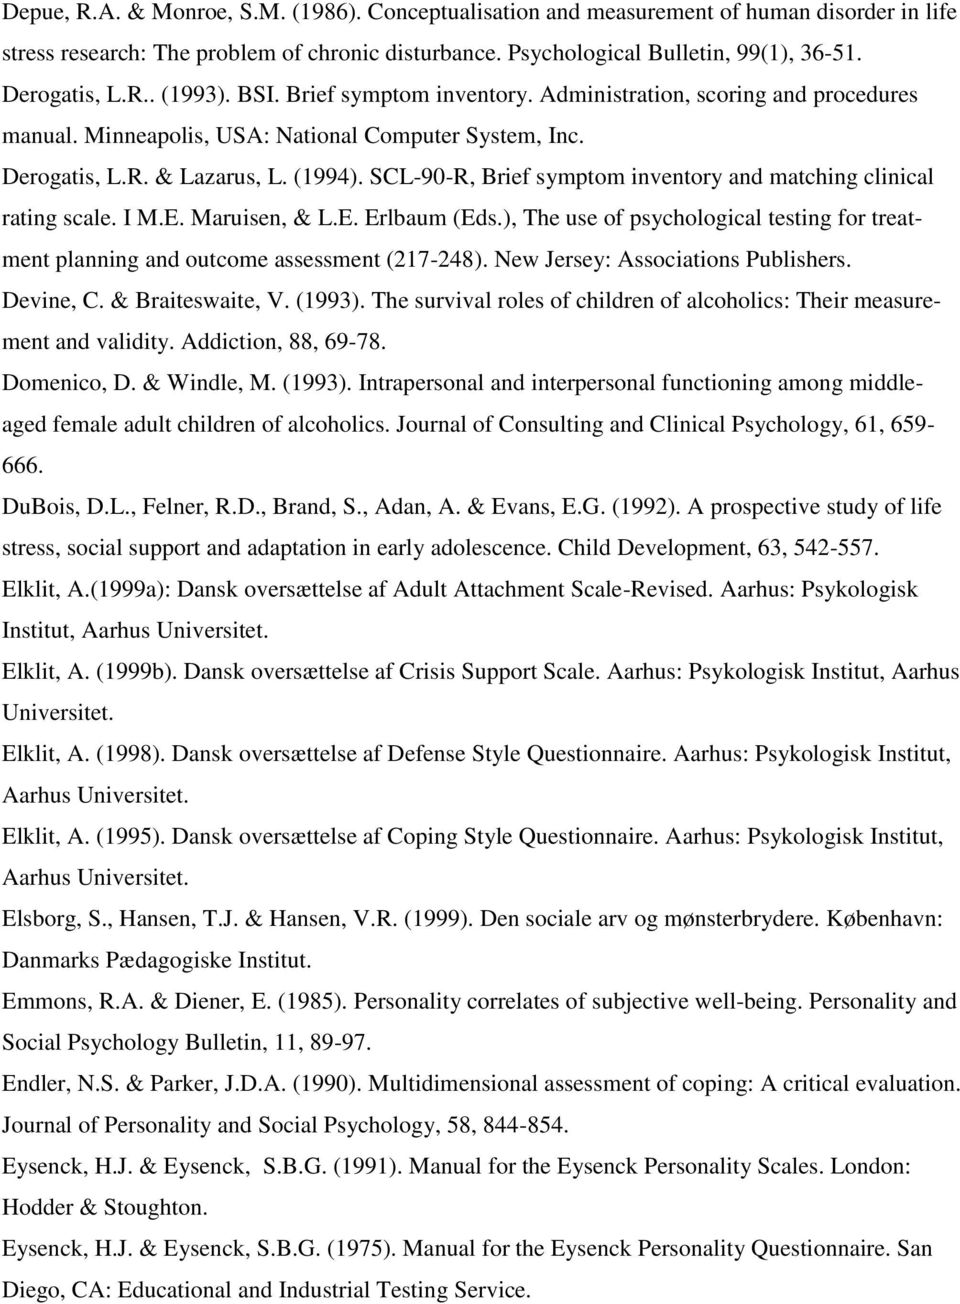 SCL-90-R, Brief symptom inventory and matching clinical rating scale. I M.E. Maruisen, & L.E. Erlbaum (Eds.), The use of psychological testing for treatment planning and outcome assessment (217-248).